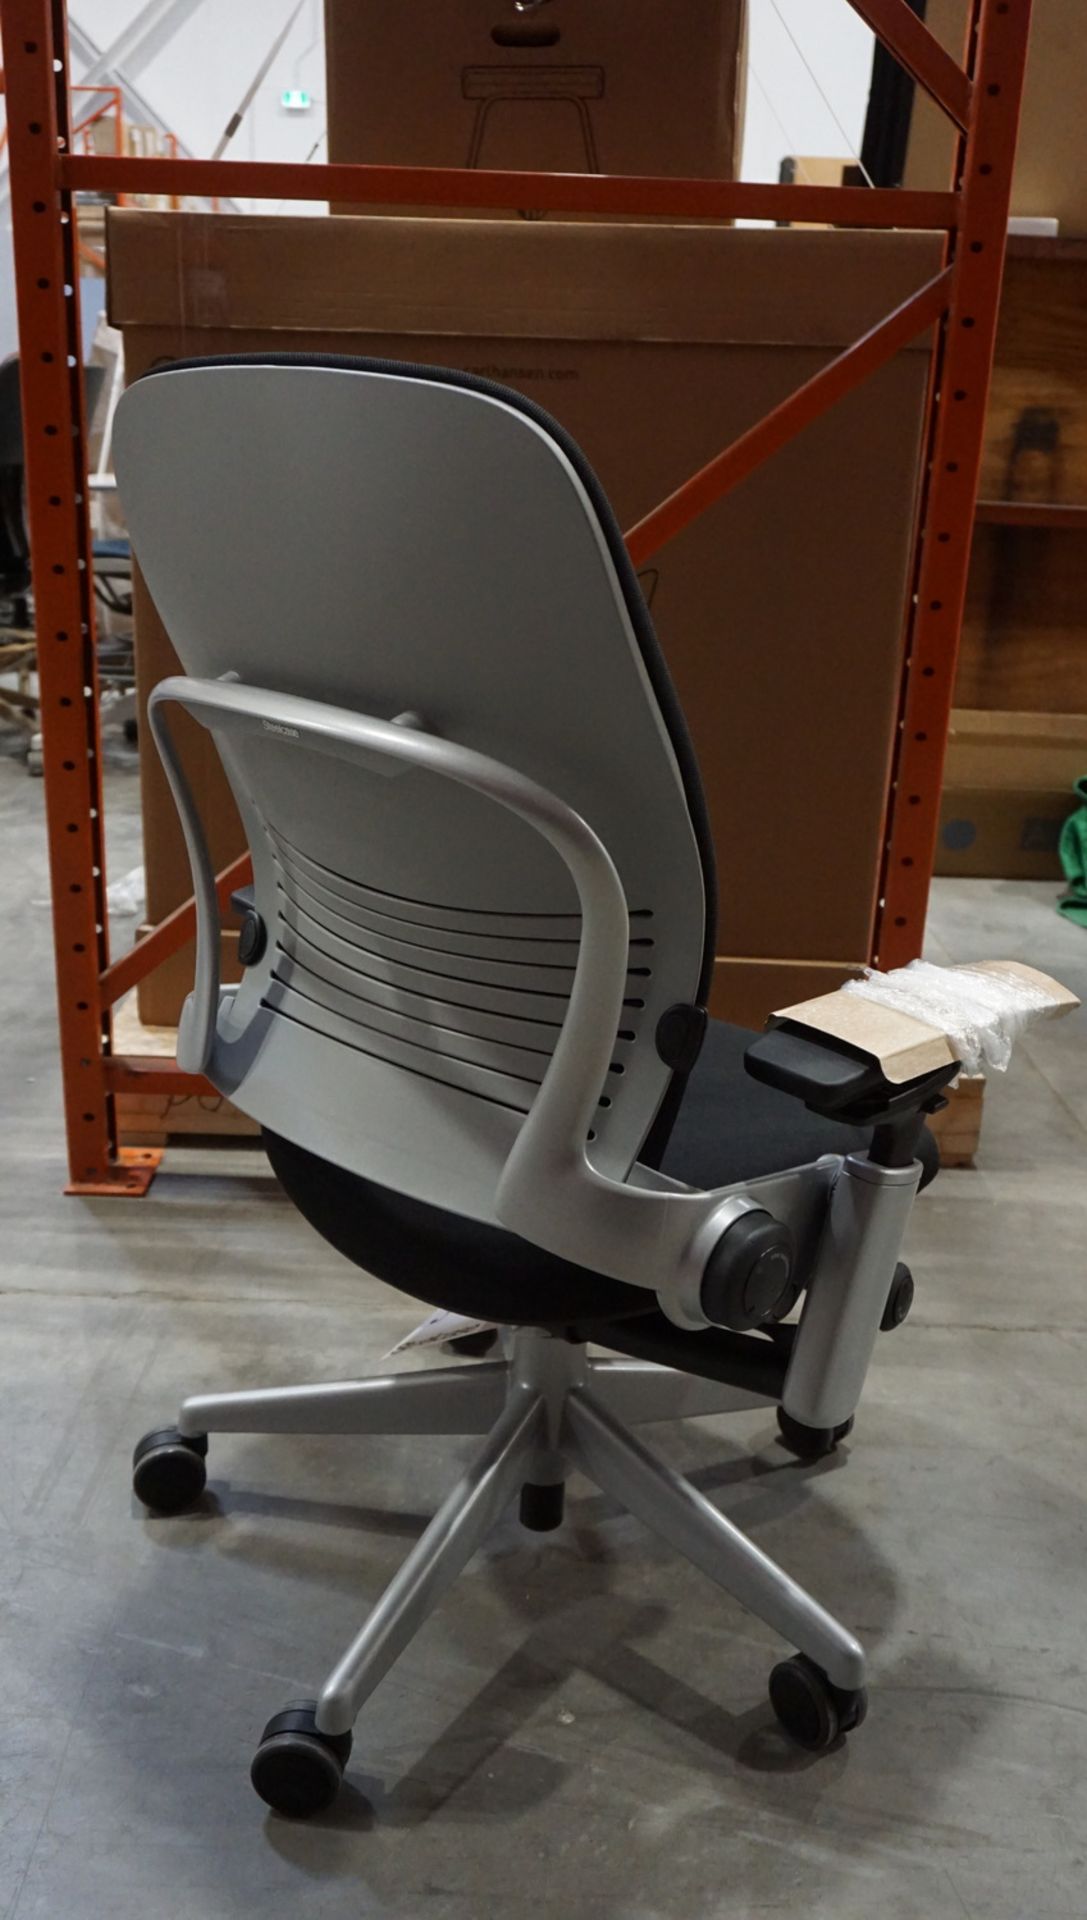 STEELCASE LEAP CHAIR W/ BLACK FABRIC, GREY FRAME, & 4-WAY ADJ ARMS - Image 2 of 2